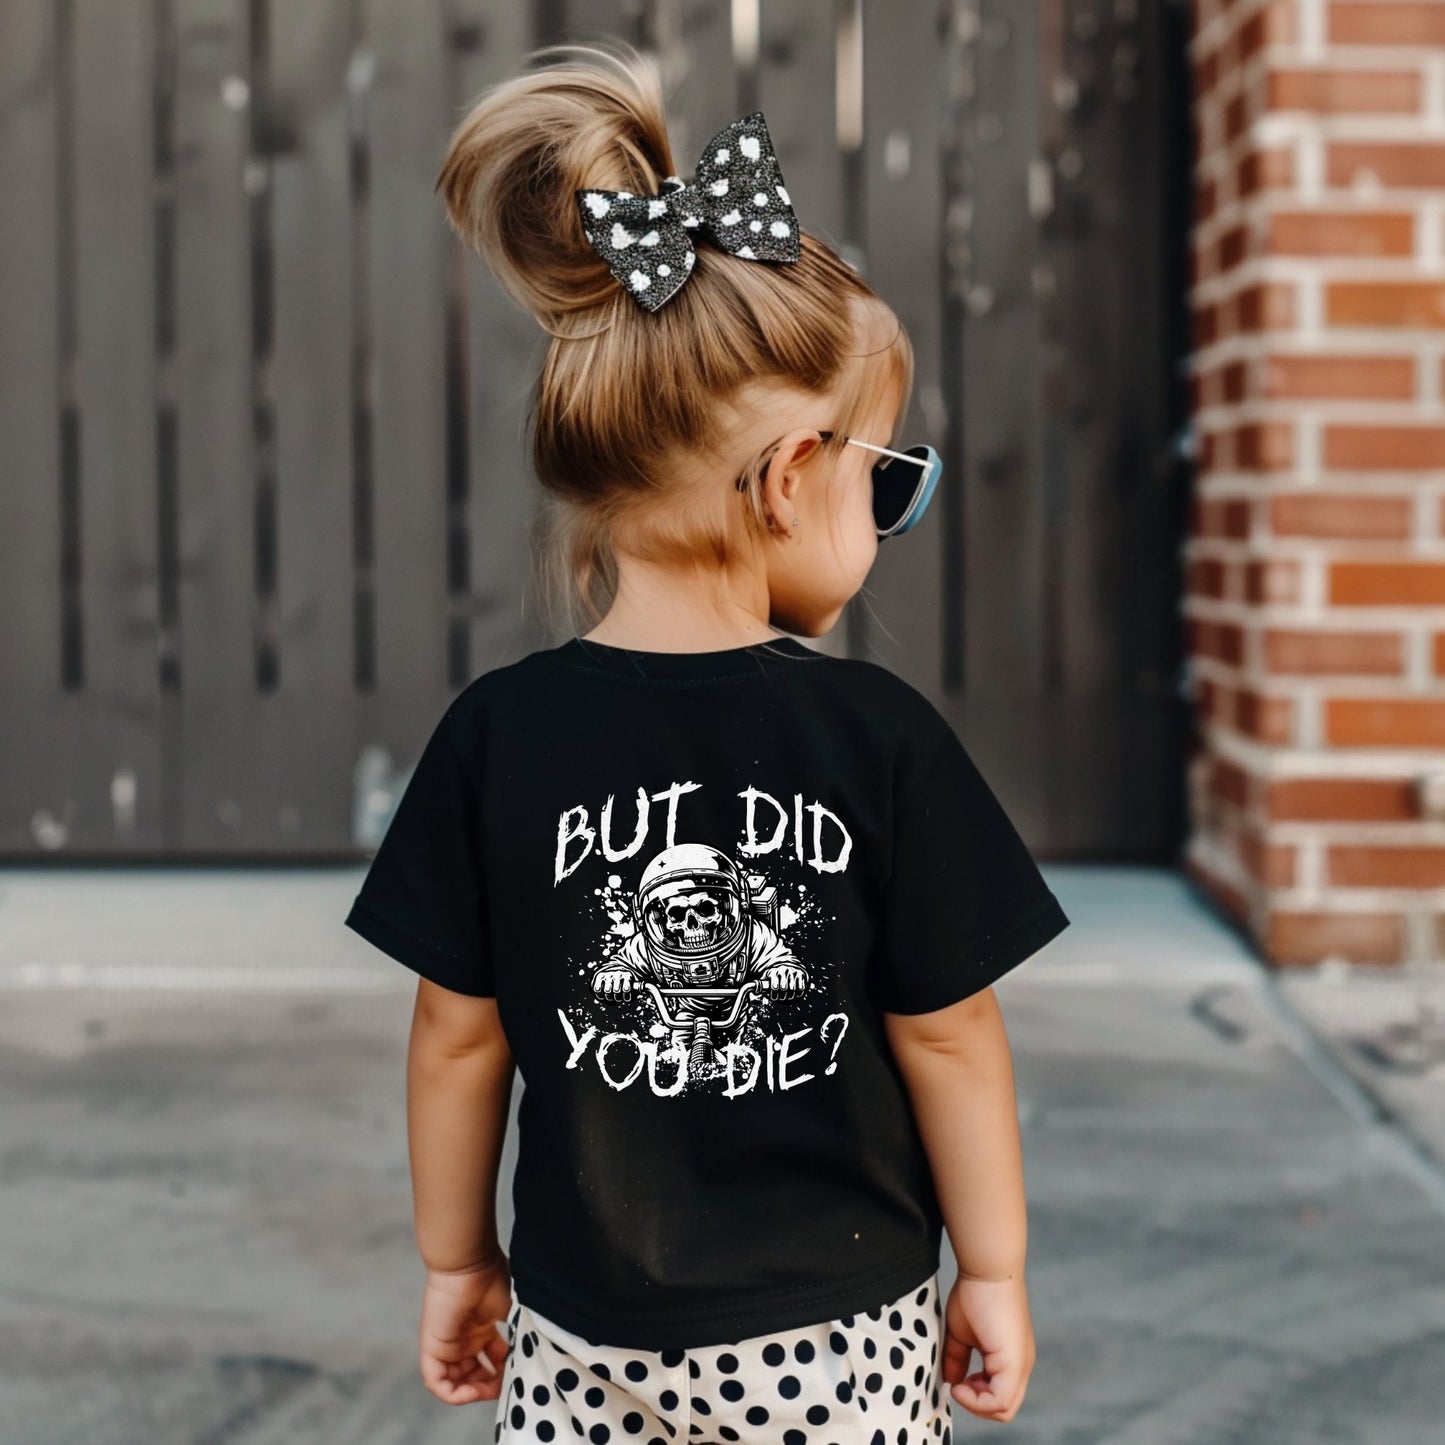 But Did You Die Tee - GingerTots - Bella Canvas Toddler - 2T - Black -